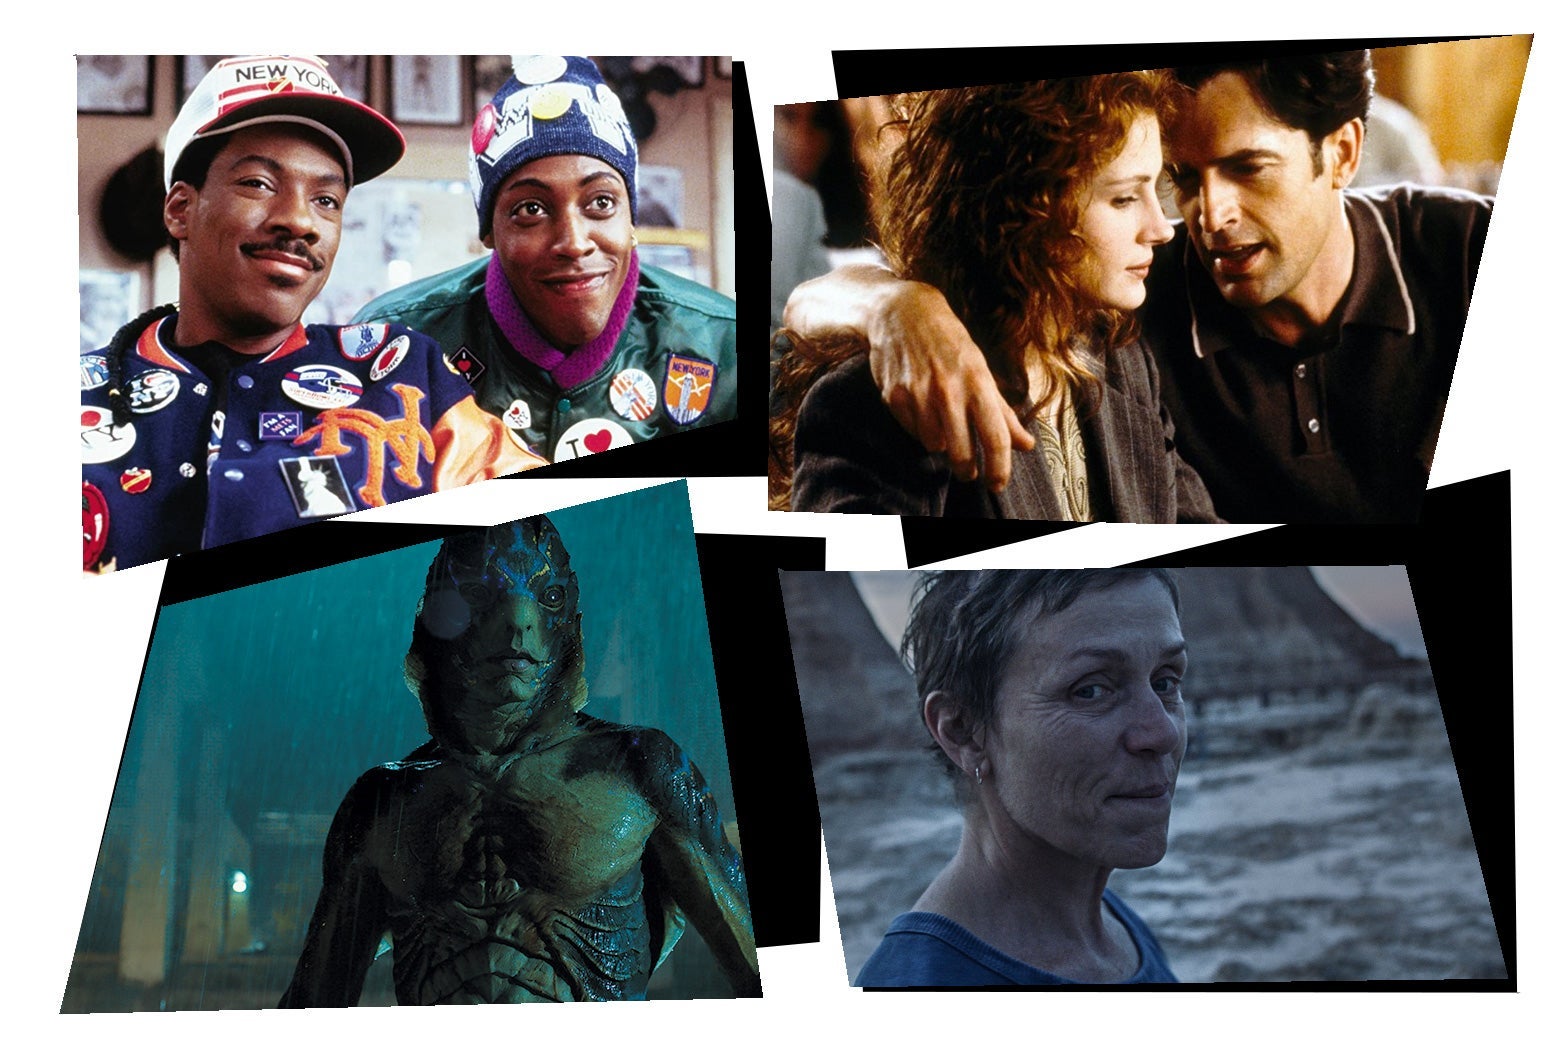 Stills from each of the movies in a mosaic art style: Eddie Murphy and Arsenio Hall smile at the camera; Dermot Mulroney talks to Julia Roberts with his arm around her shoulder; An amphibious-looking creature looks at the camera; Frances McDormand looks off into the distance.